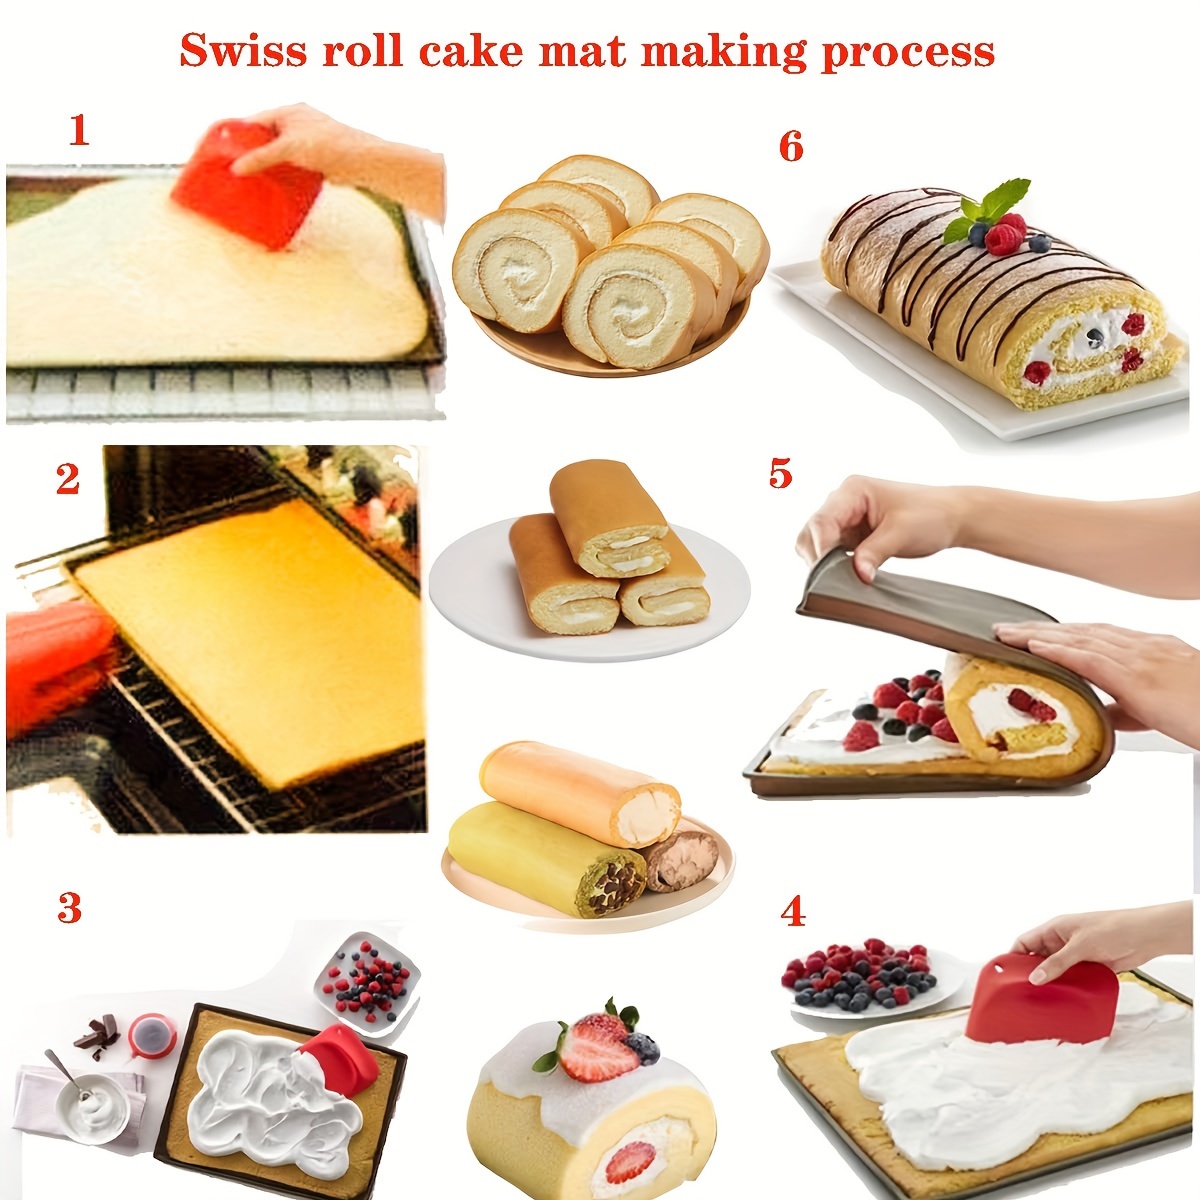 Silicone Baking Pad Multi-functional Cake Tray Pan Mat Painted Pad Pastry  Swiss Roll Baking Mold Tool